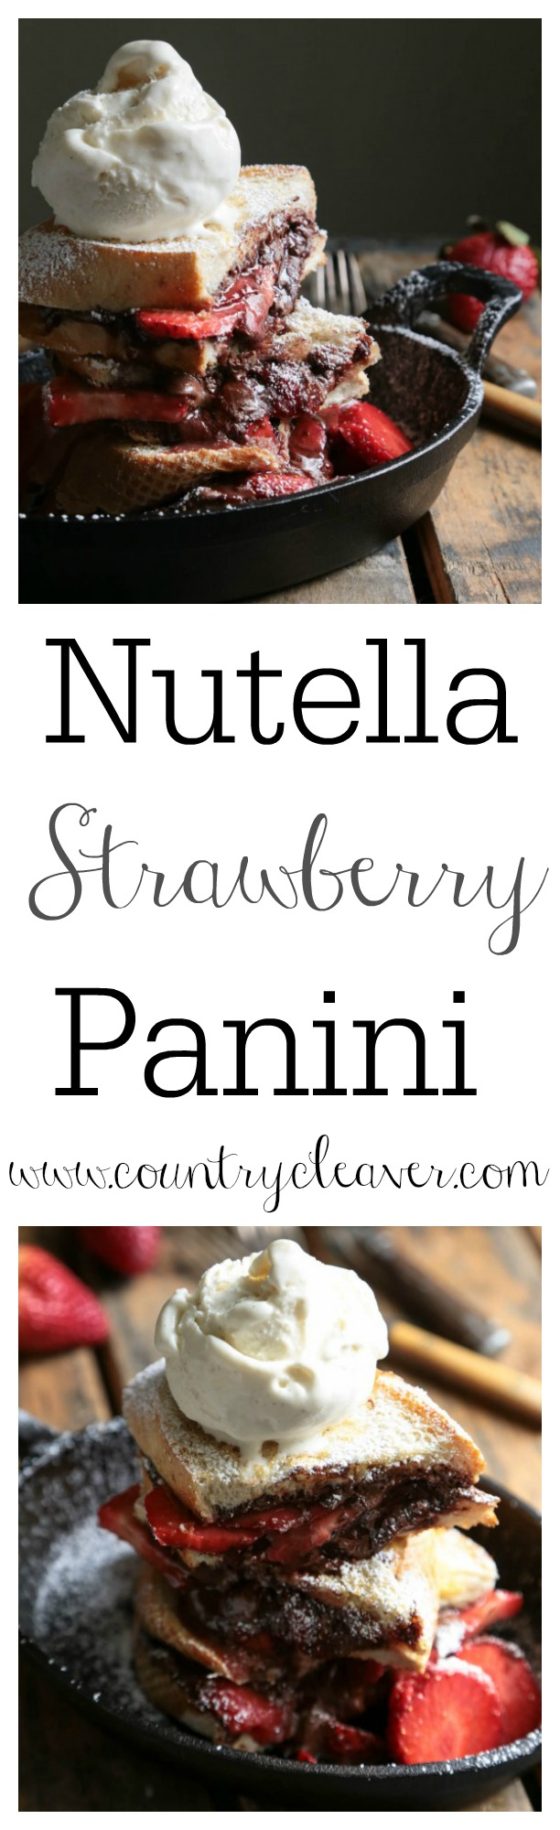 Nutella Strawberry Panini--www.countrycleaver.com